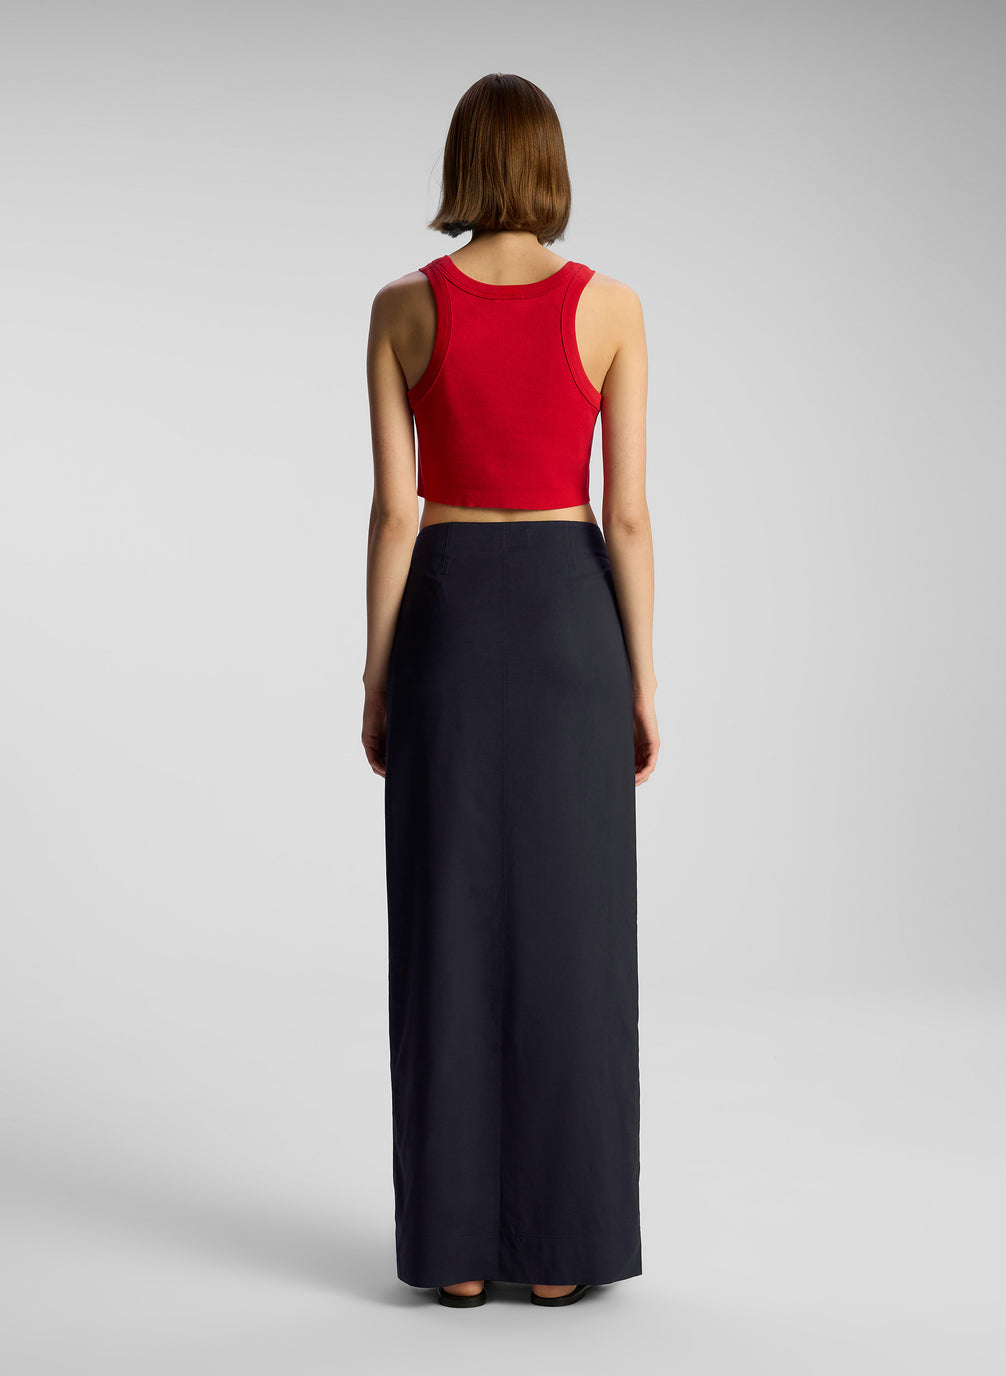 back view of woman wearing red cropped tank top and nay blue maxi skirt